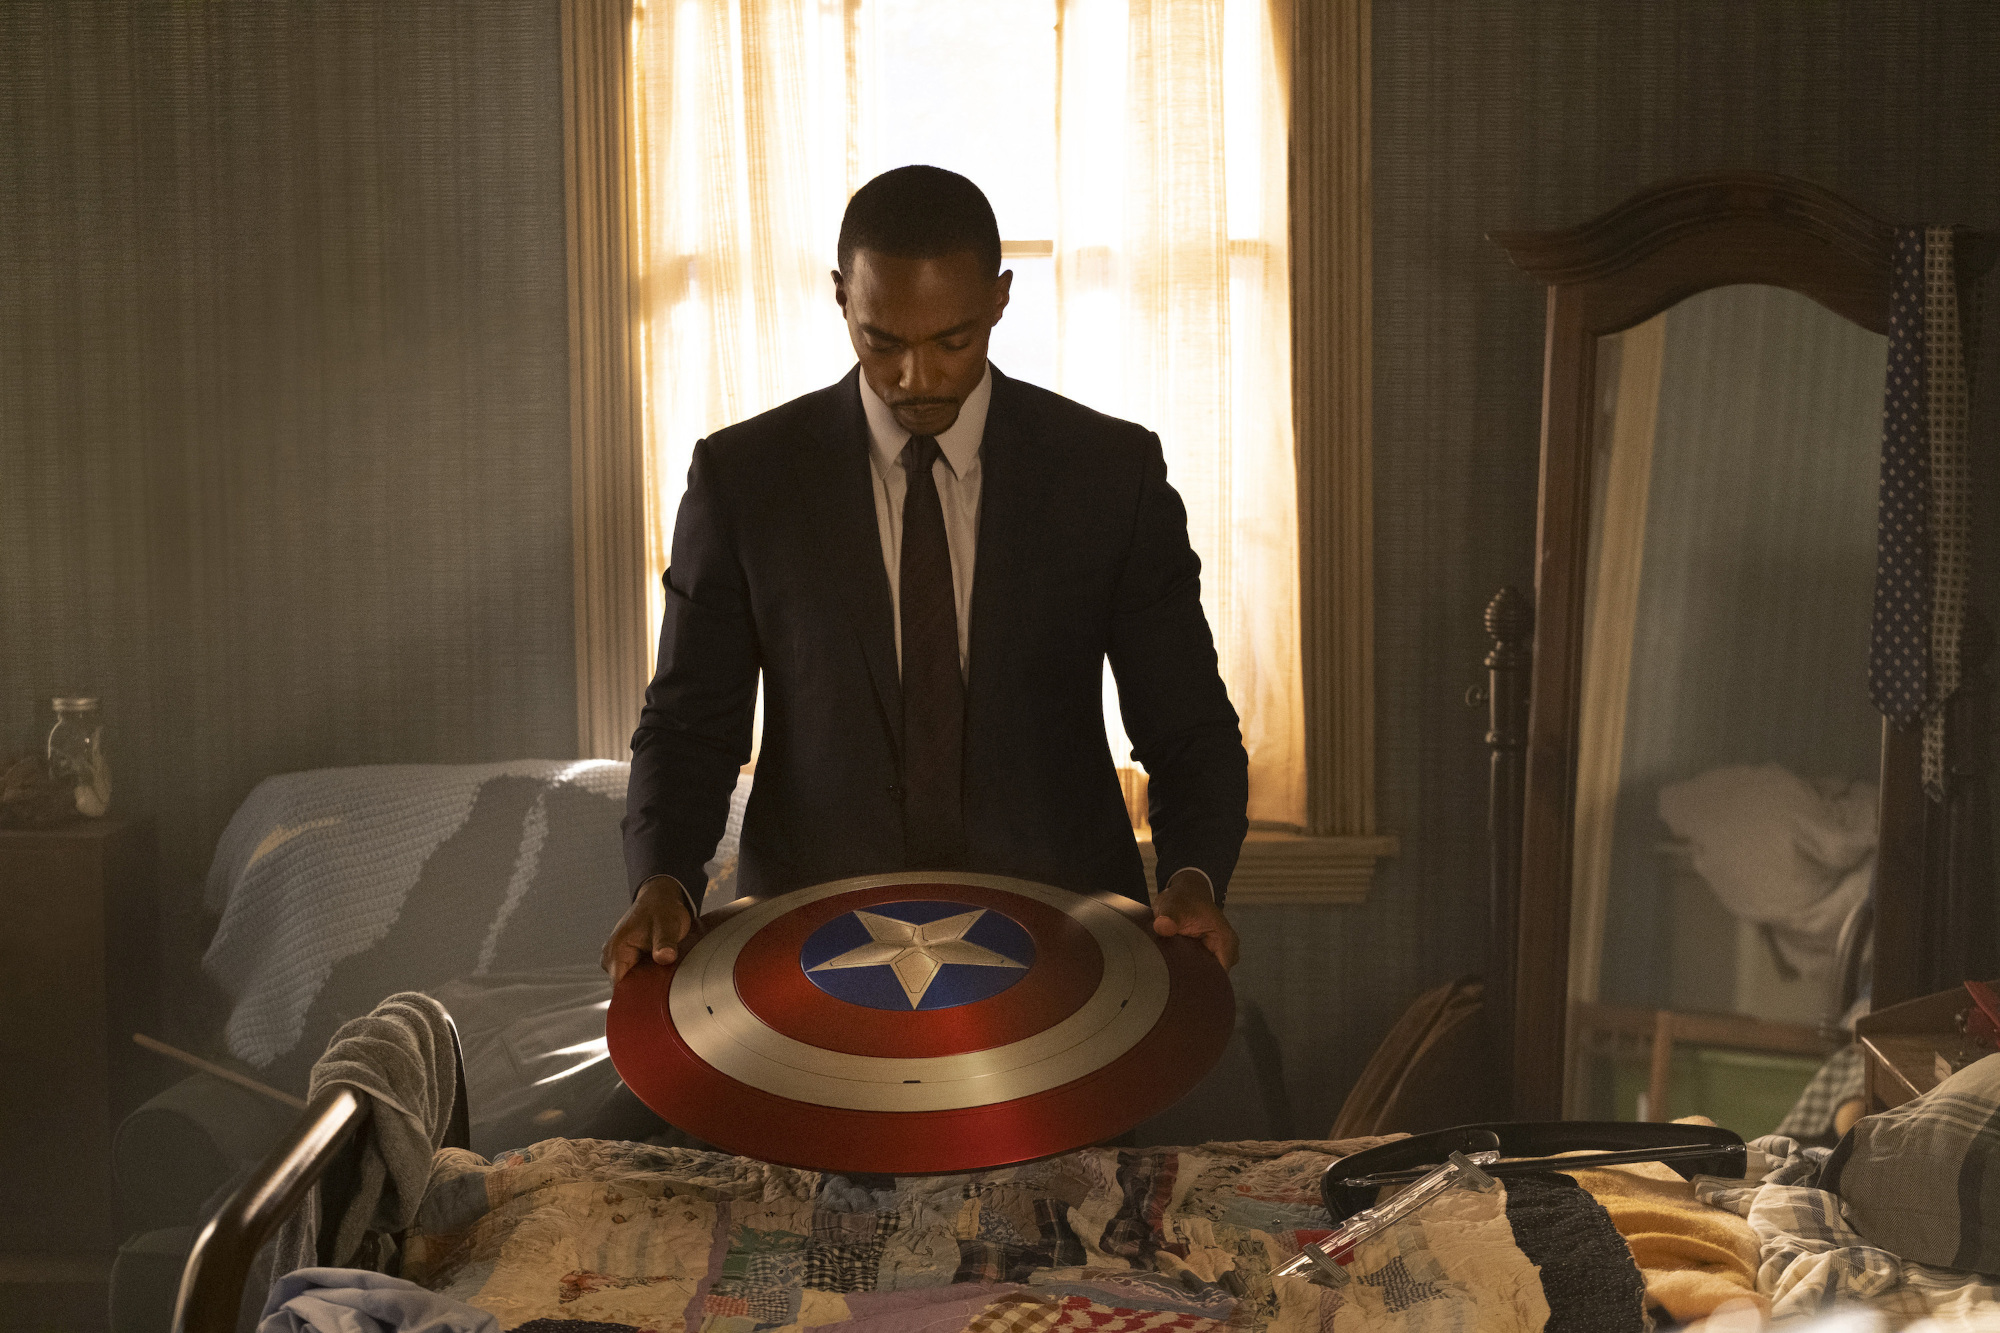 Anthony Mackie as Sam Wilson in 'The Falcon and the Winter Soldier' Episode 1. Captain America's shield sits on a desk, and he's standing behind the desk and looking down at it.